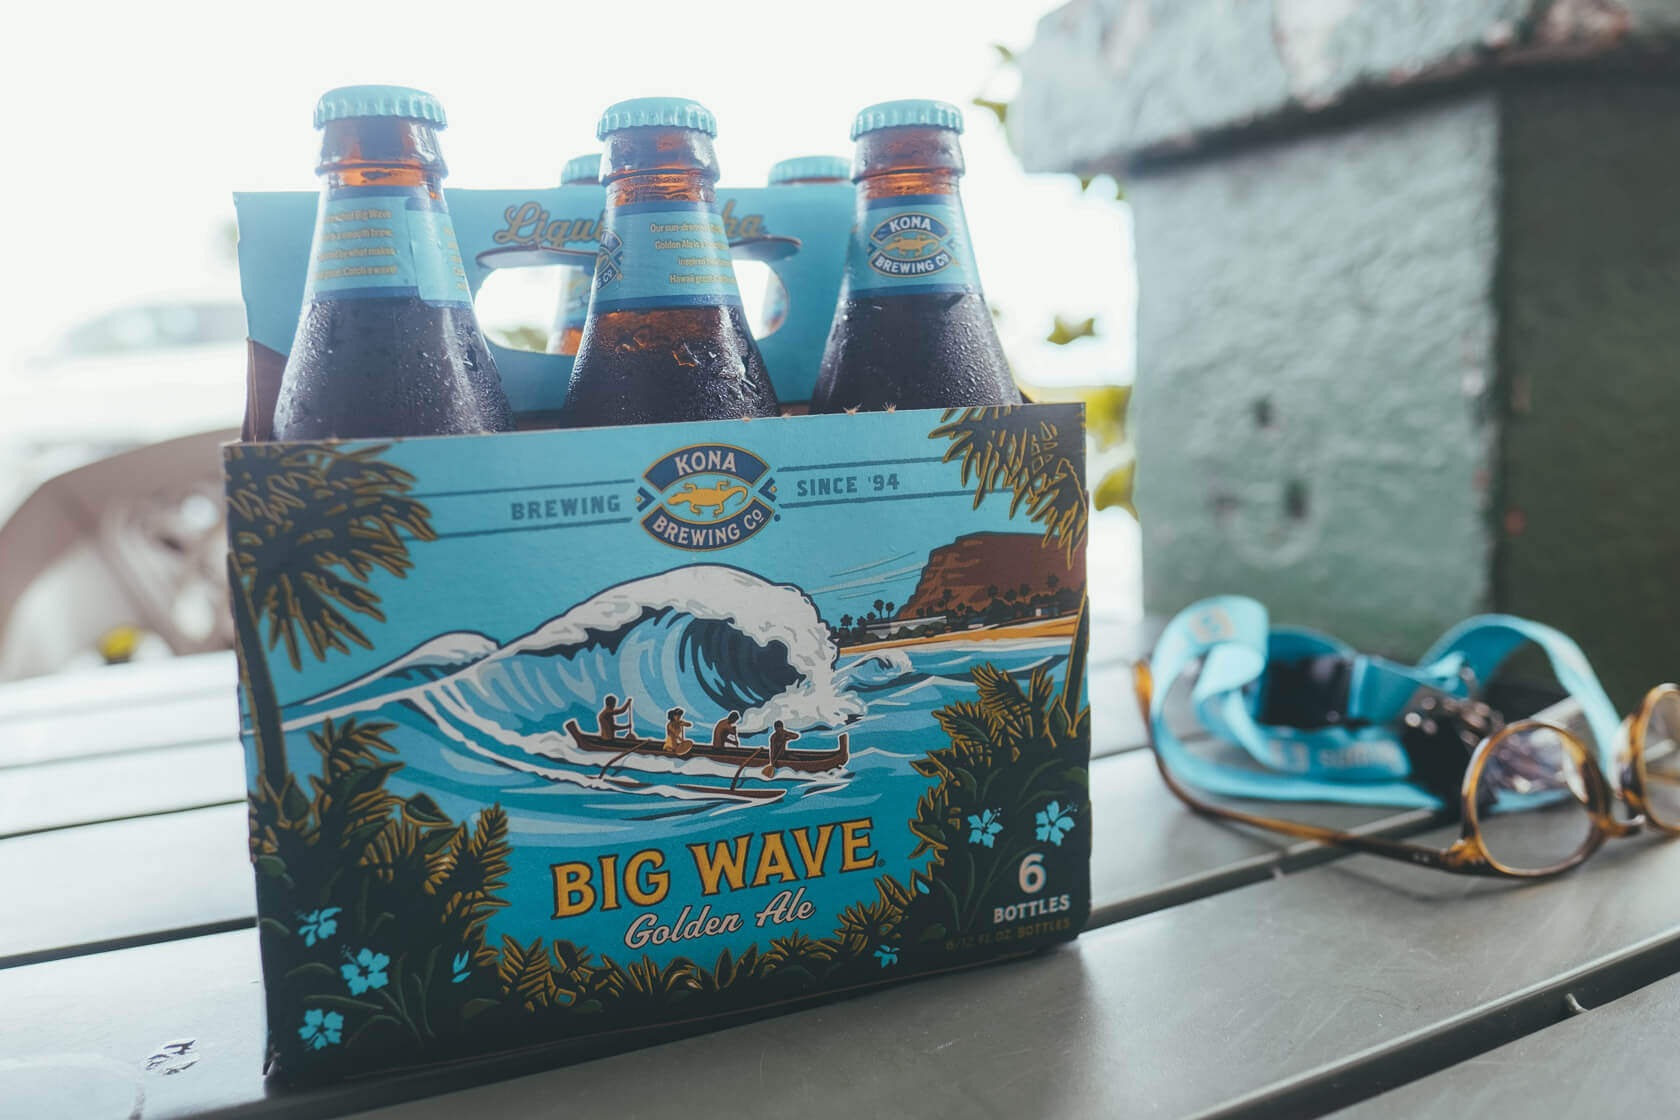 Beer from Kona Brewing Company